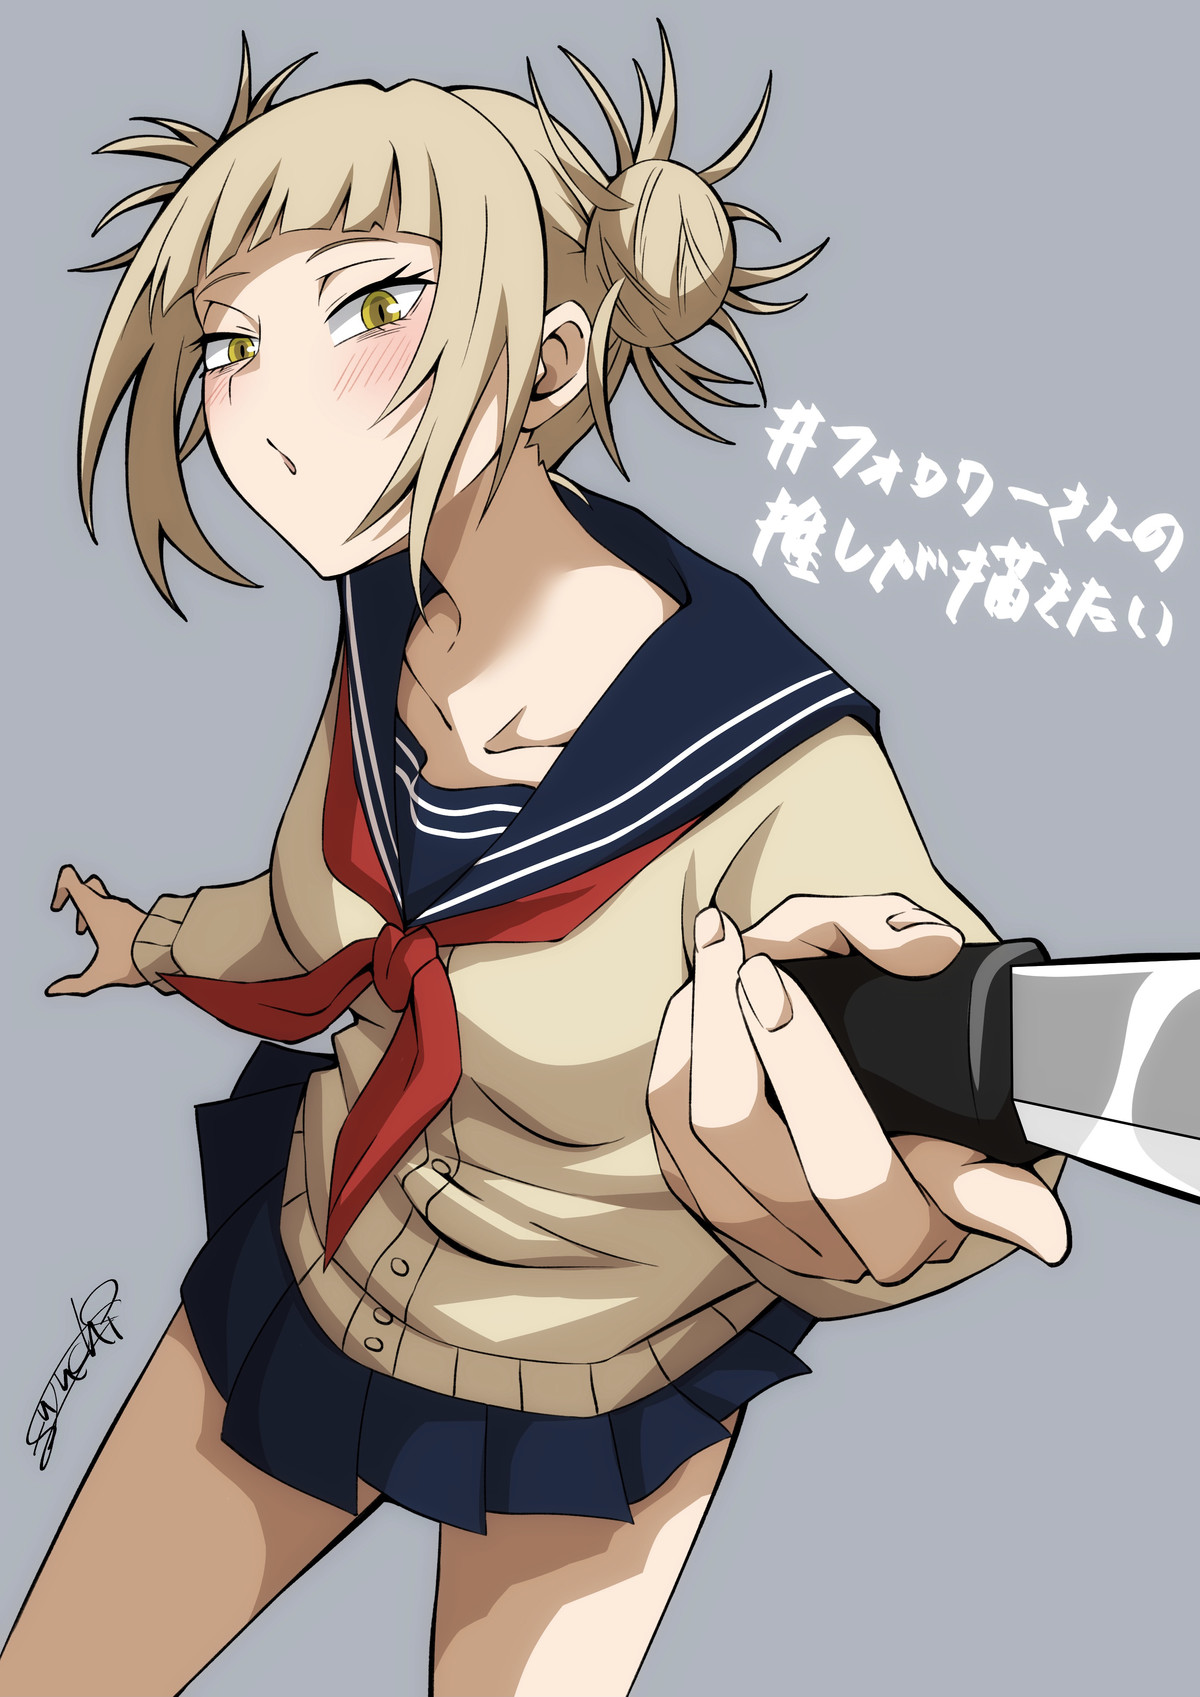 Daily Toga - 942: Stabby. join list: DailyToga (477 subs)Mention History Source: .. Cptbajusz